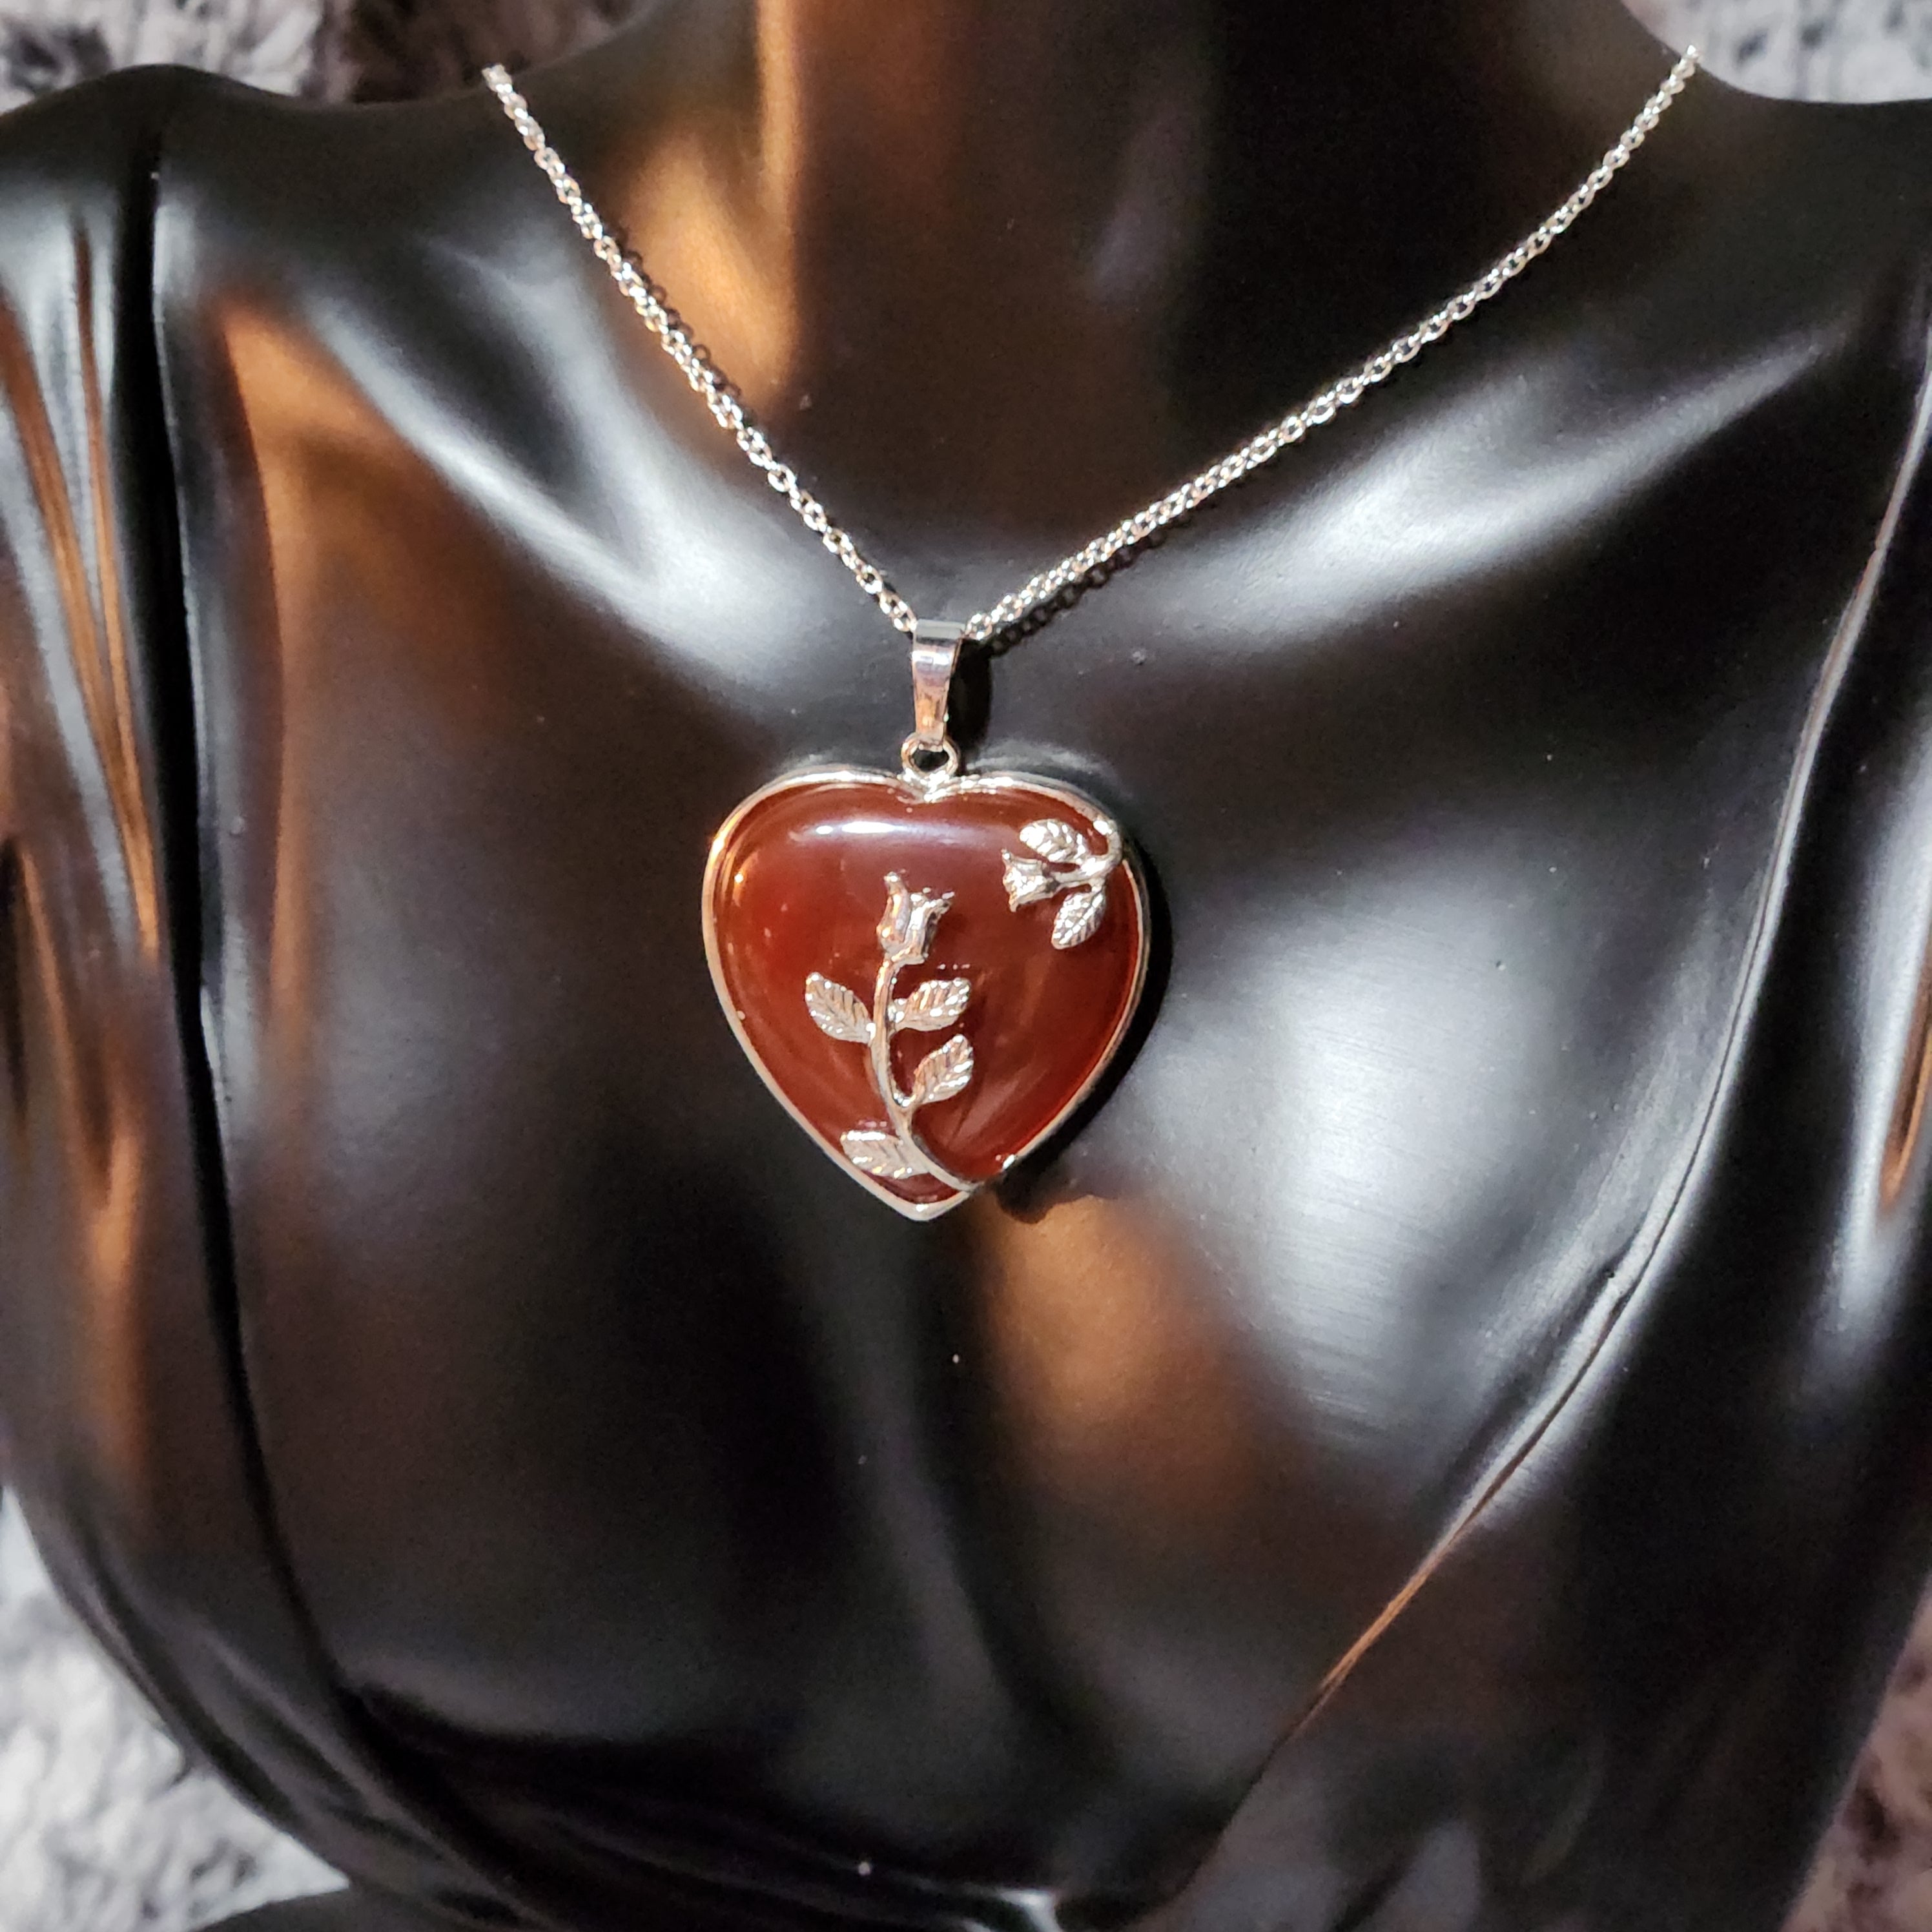 REIKI CRYSTAL PRODUCTS Natural Crystal Carnelian Pendant Heart Pendant  Crystal Pendant Heart Shape Stone Pendant Reiki Healing Pendant With Silver  Polish Metal Chain Healing Stone Pendant With Chain - Pendant Size 15-20